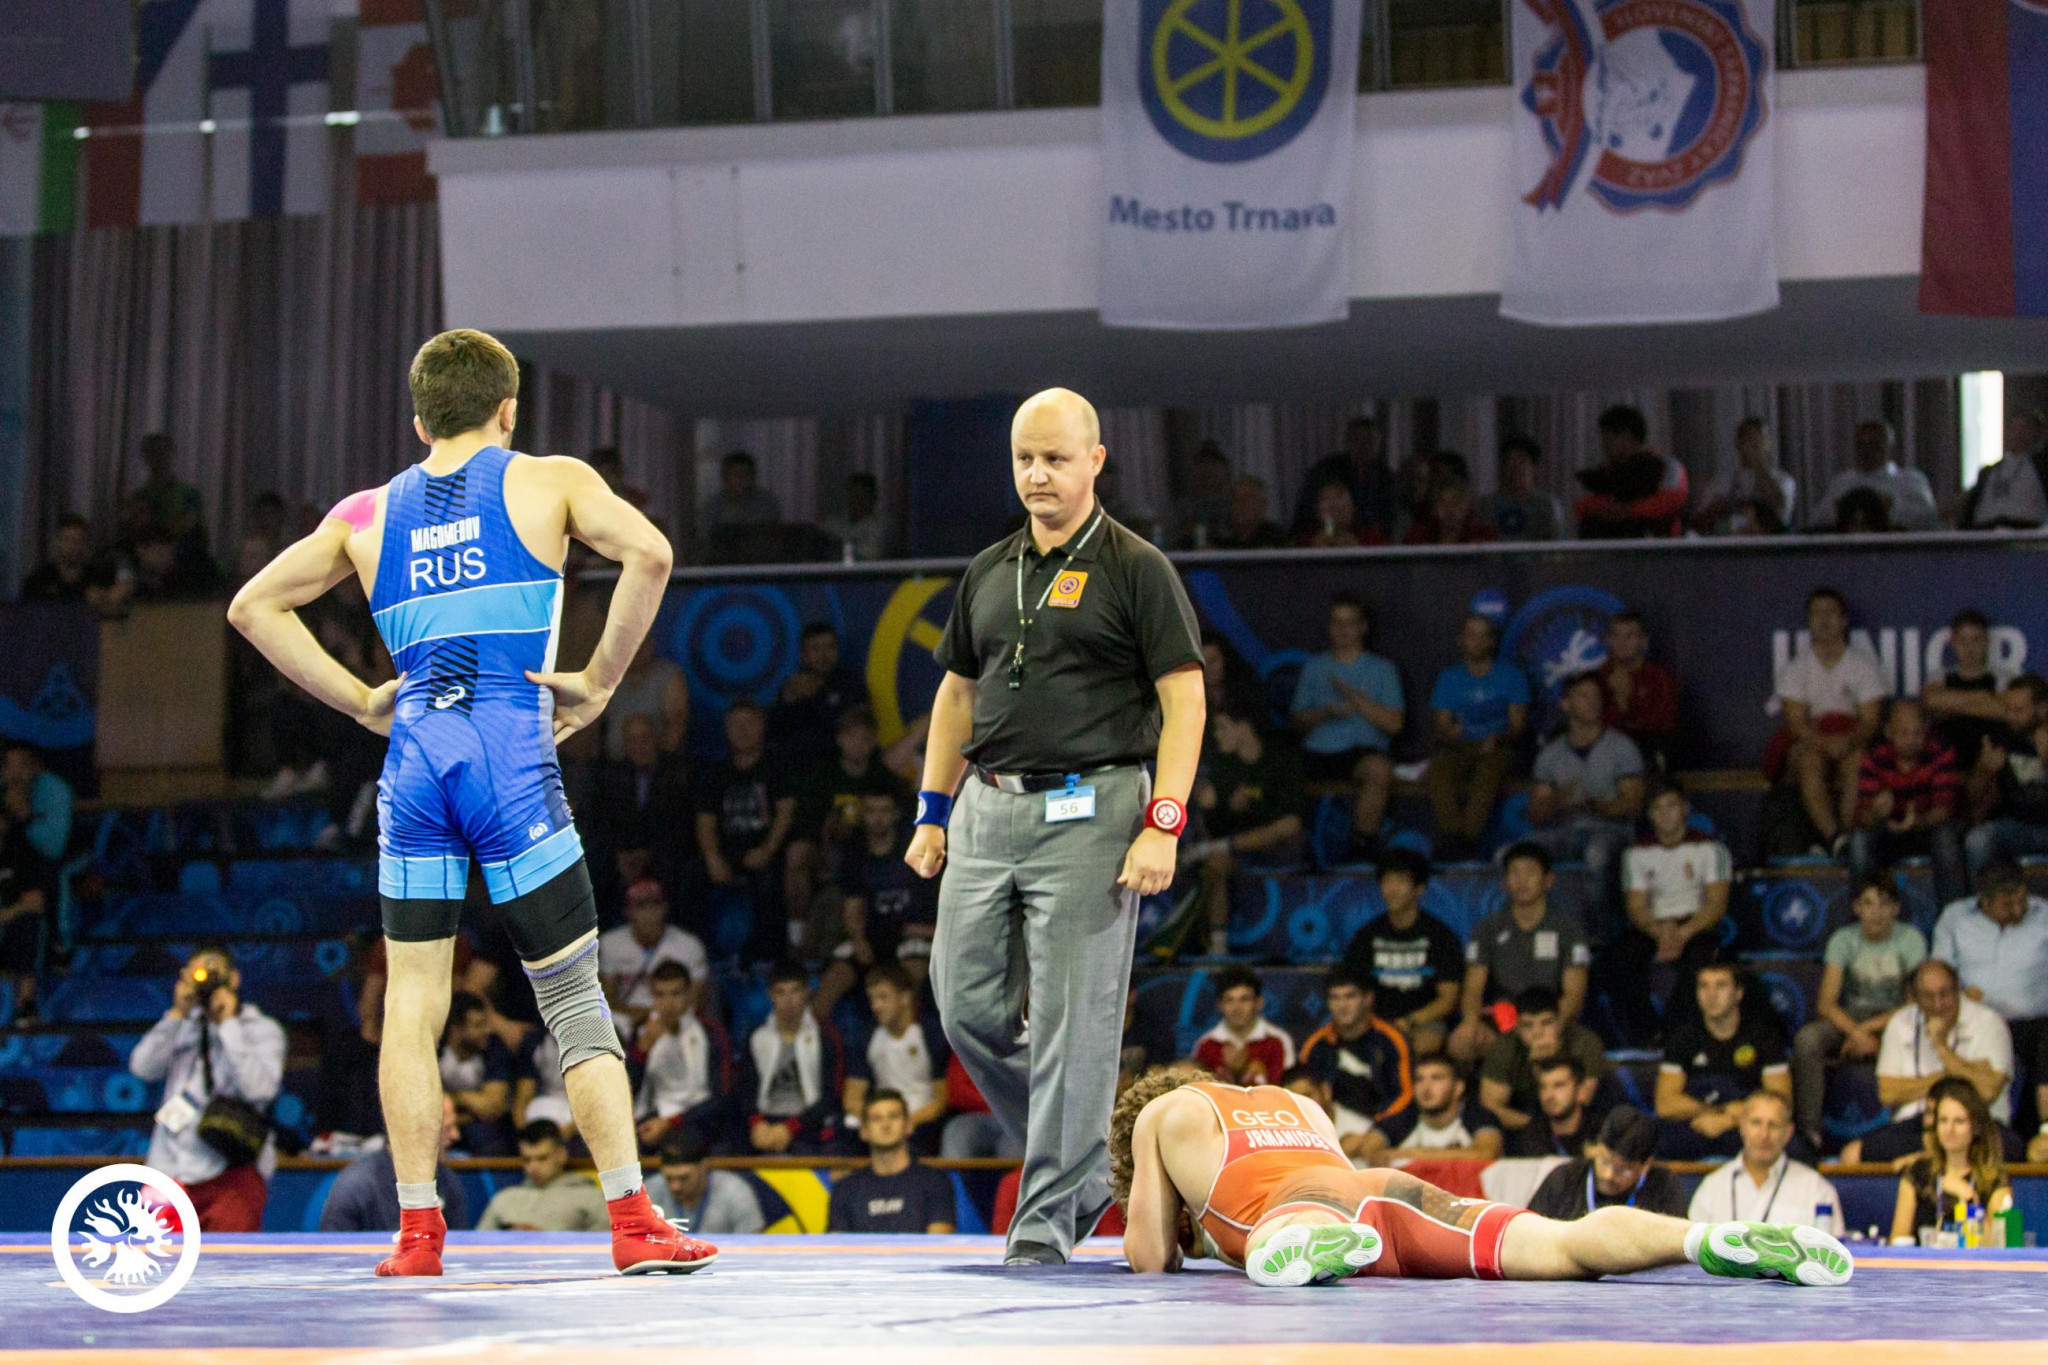 Russia secured another two gold medals as they wrapped up the team title on the final day of the event ©UWW